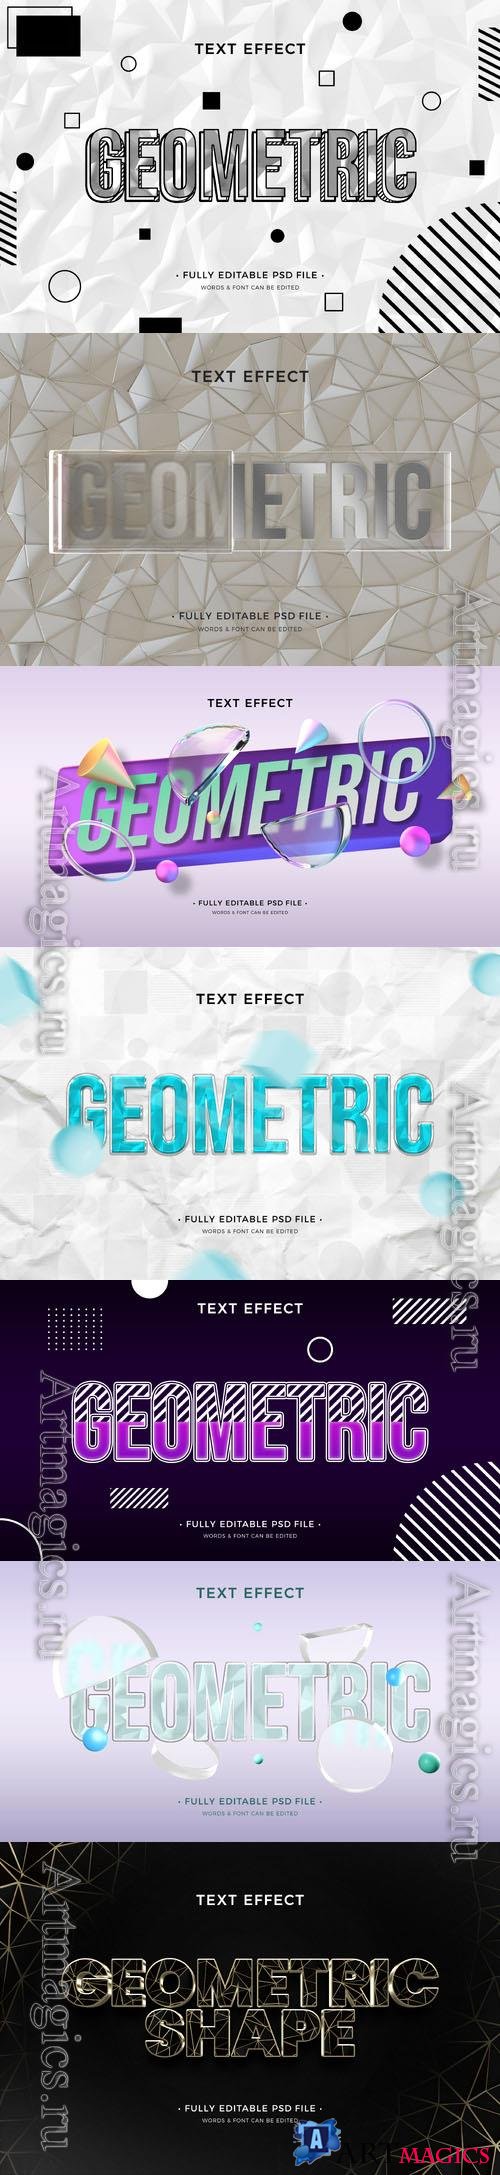 PSD geometric shapes text effect